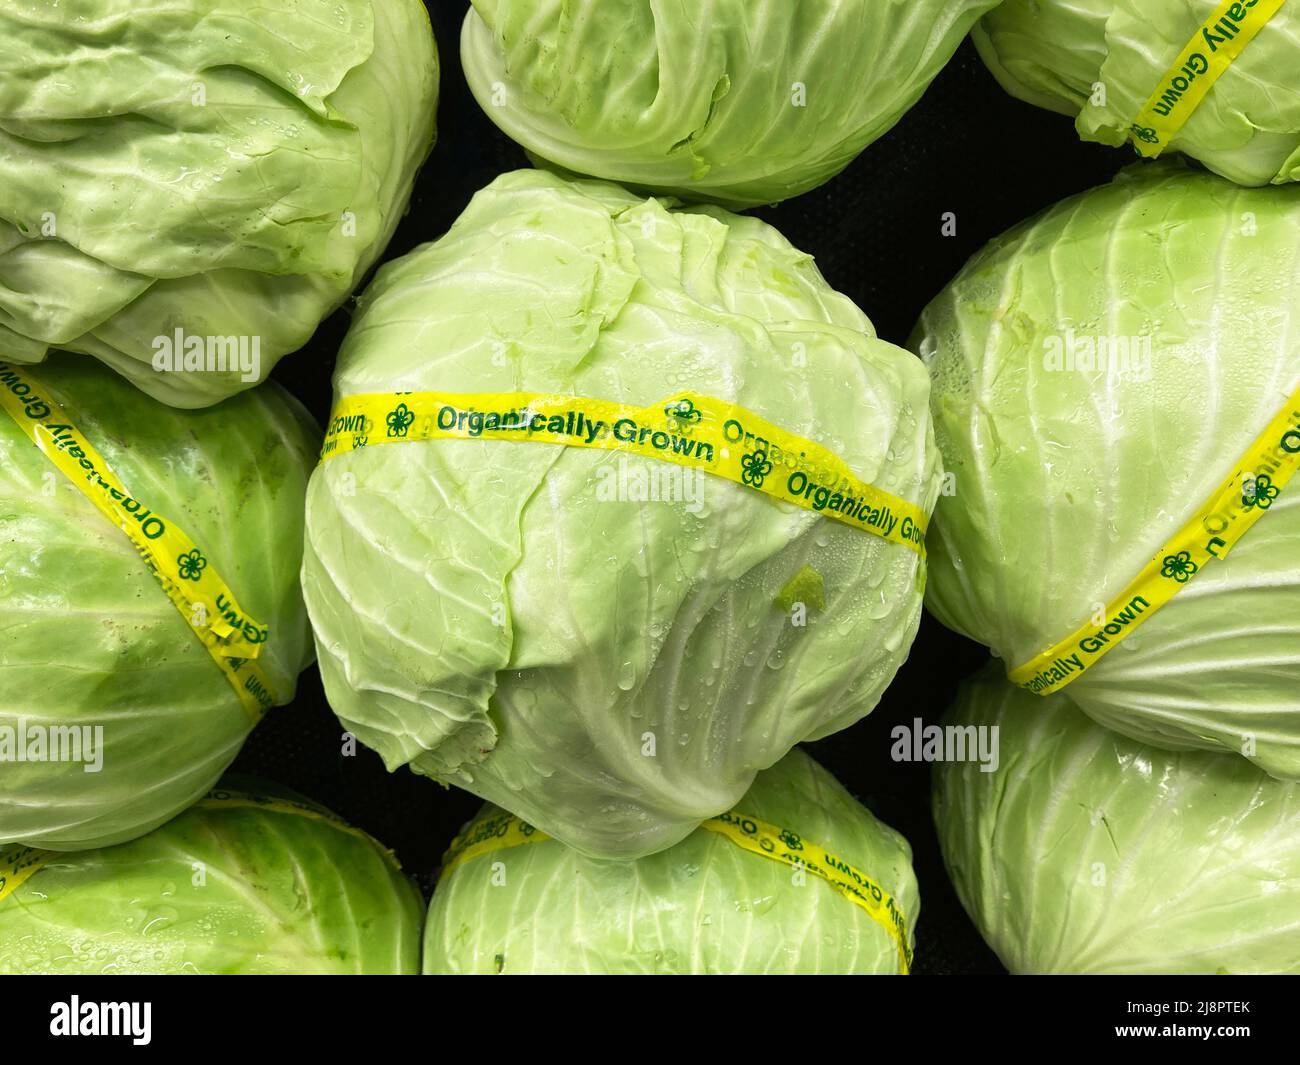 Fresh organically grown green cabbage on display in the vegetable section of a grocery store. Stock Photo